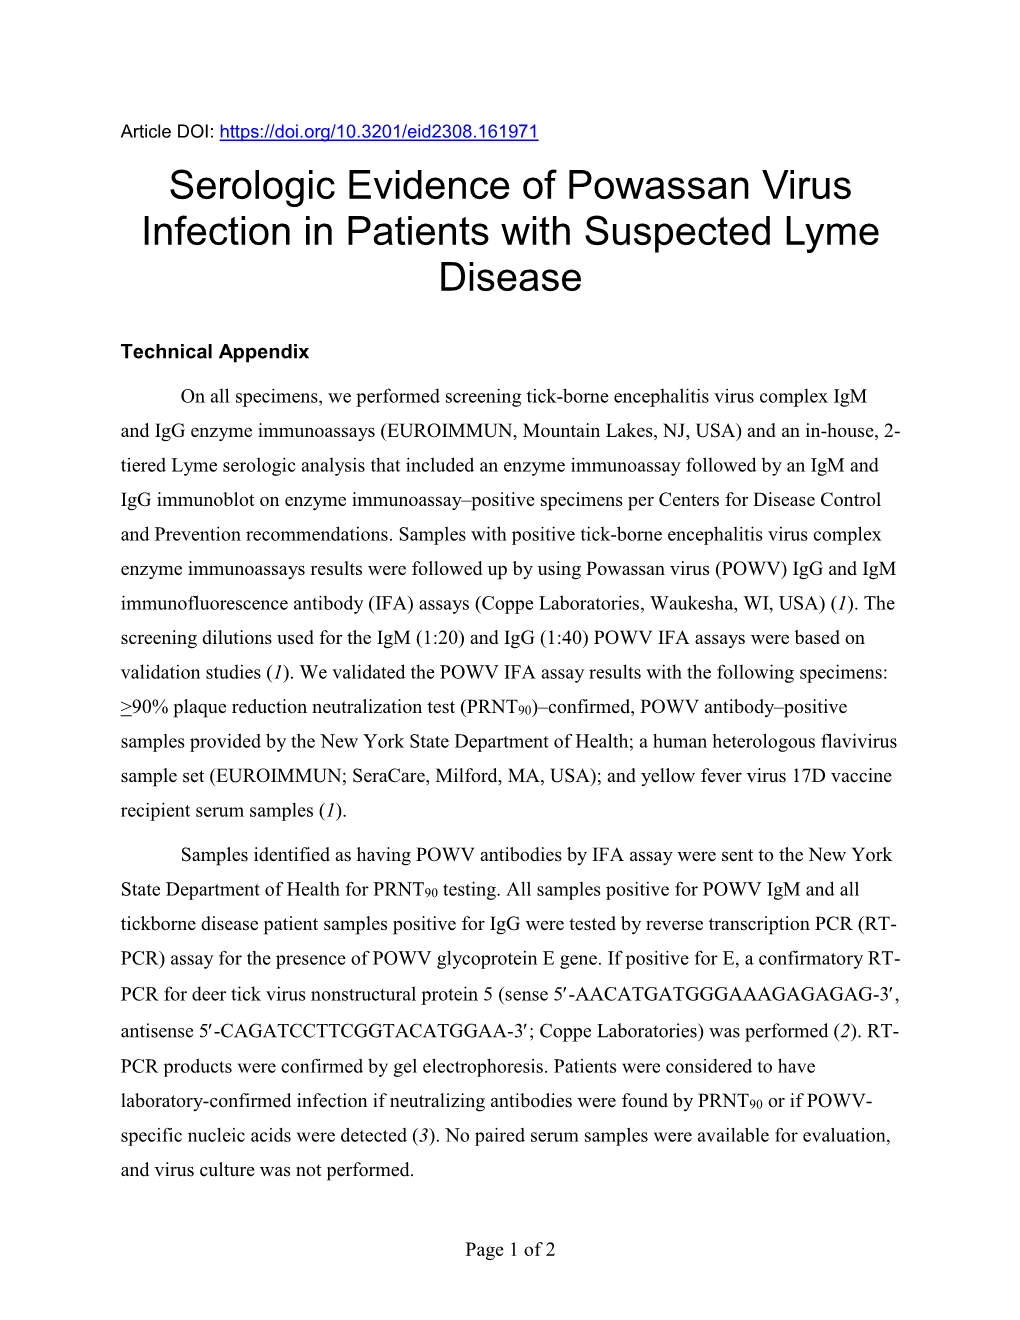 Serologic Evidence of Powassan Virus Infection in Patients with Suspected Lyme Disease